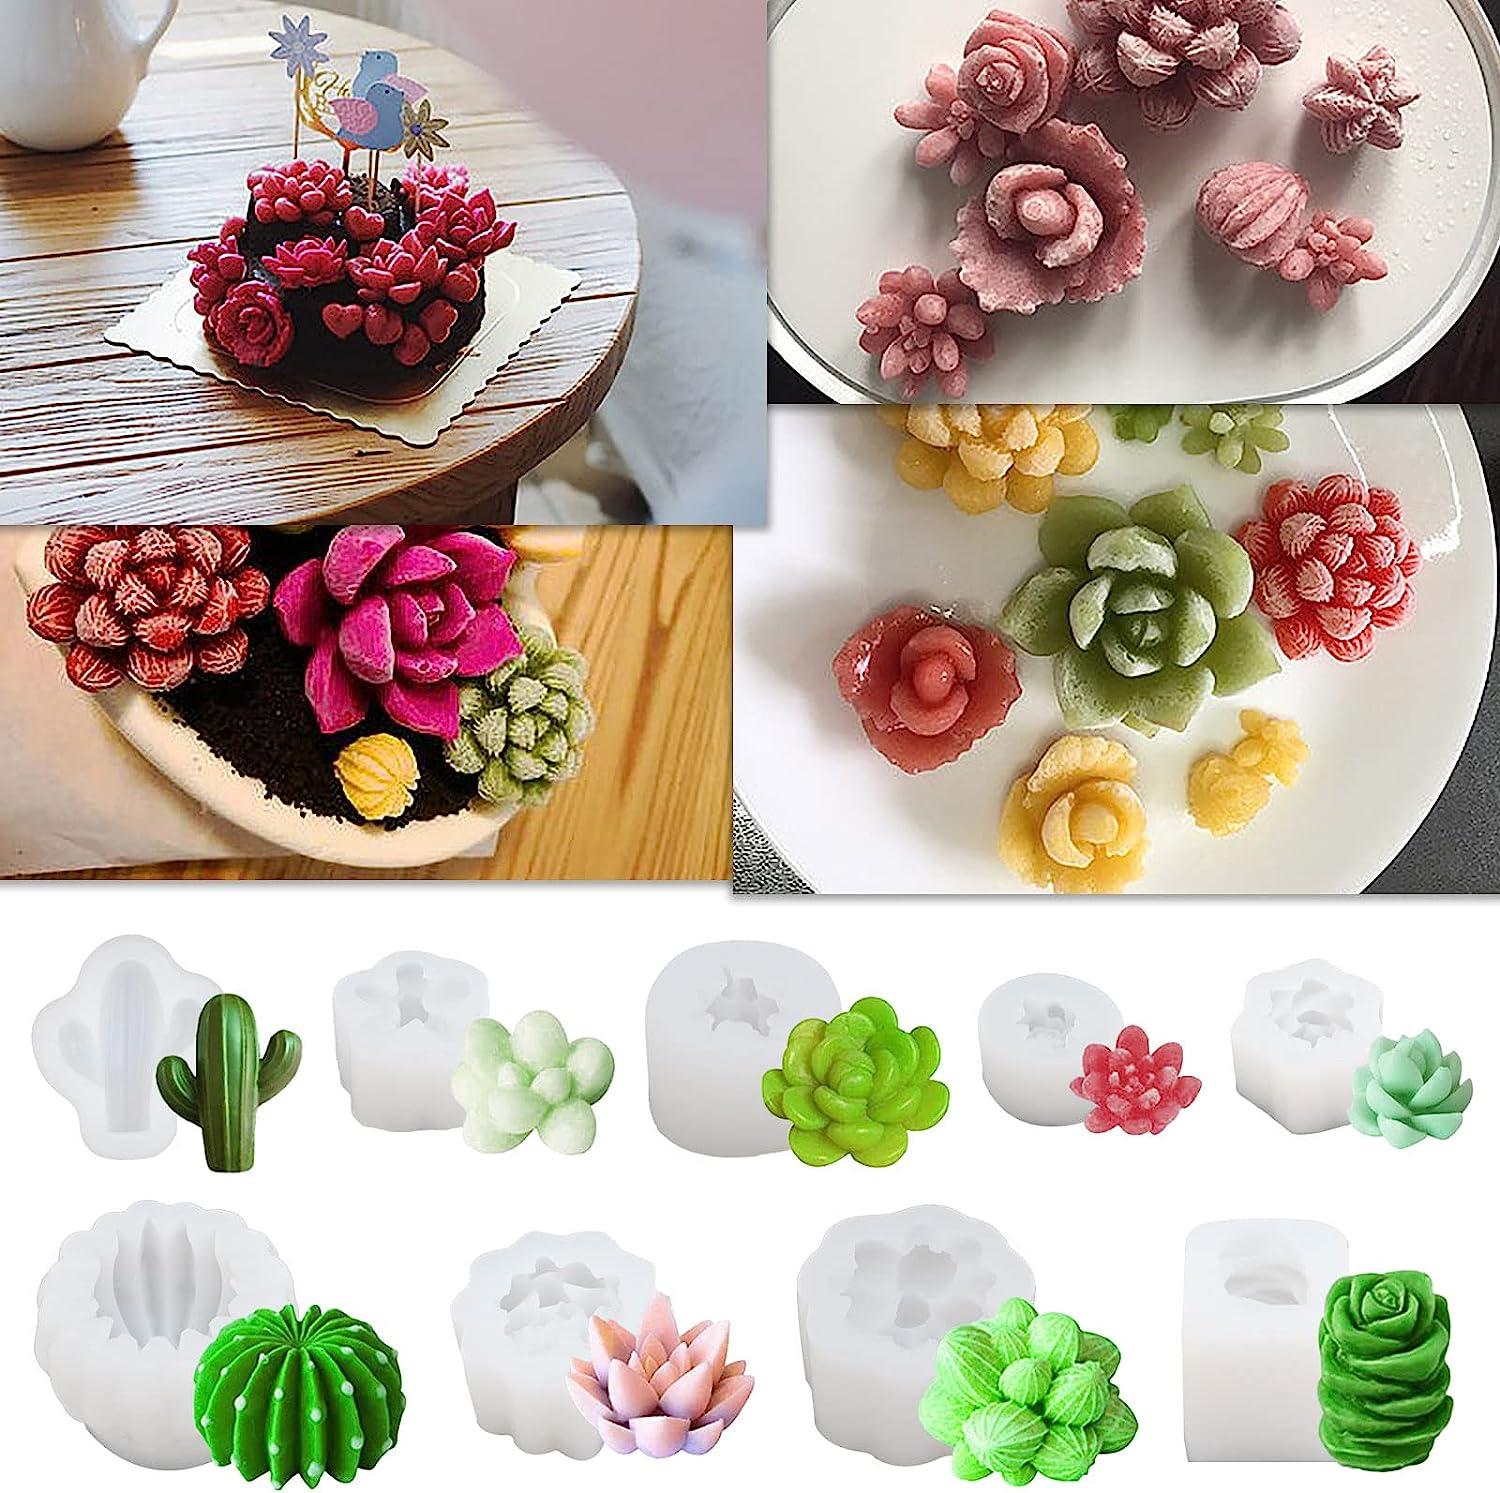 Rose Incense Candle Mold DIY Handmade Flower Cake Decorated